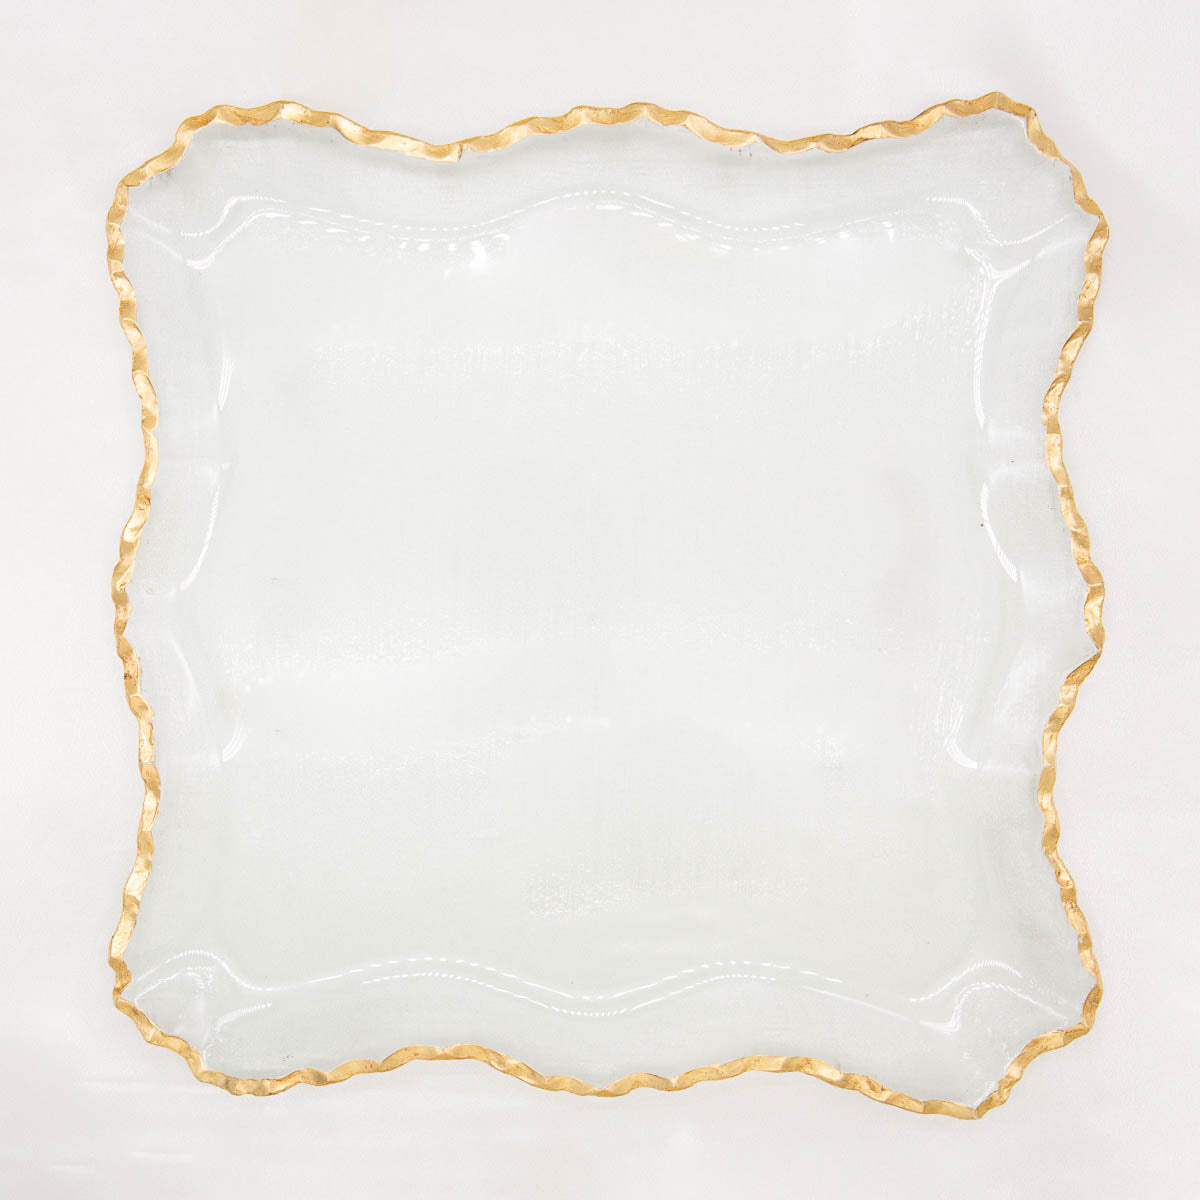 Montague Square Serving Tray